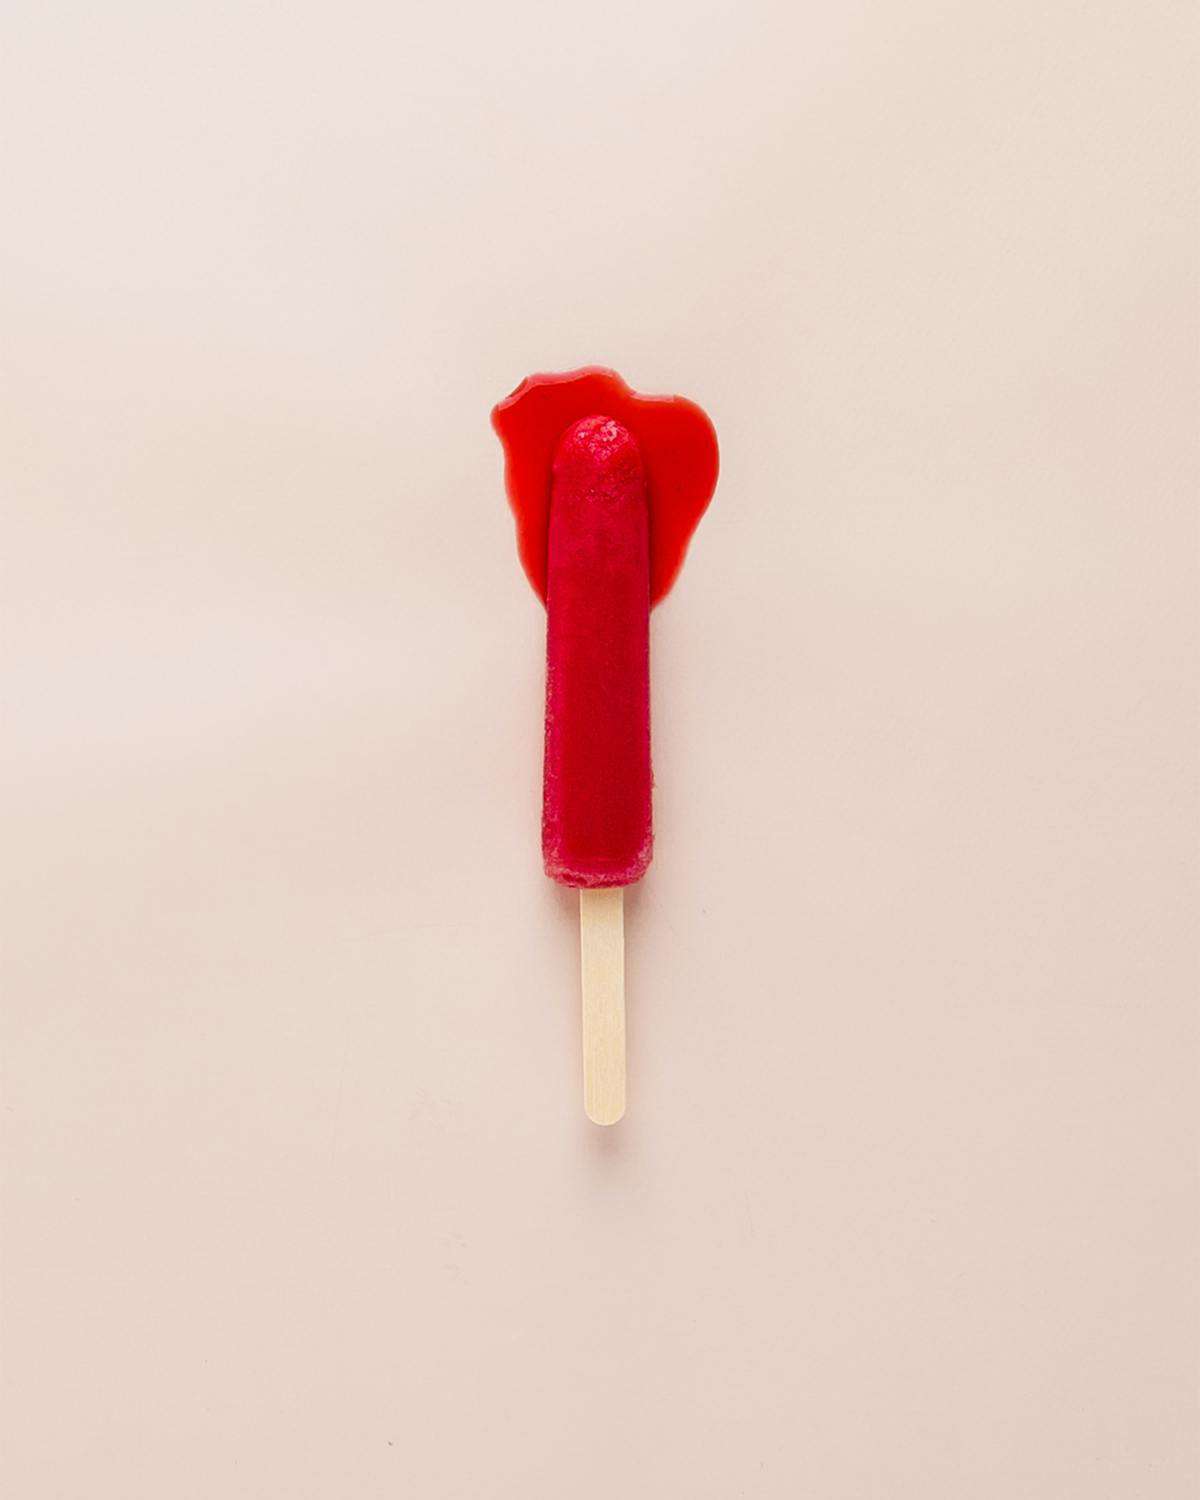 An image of a melting red popsicle. 